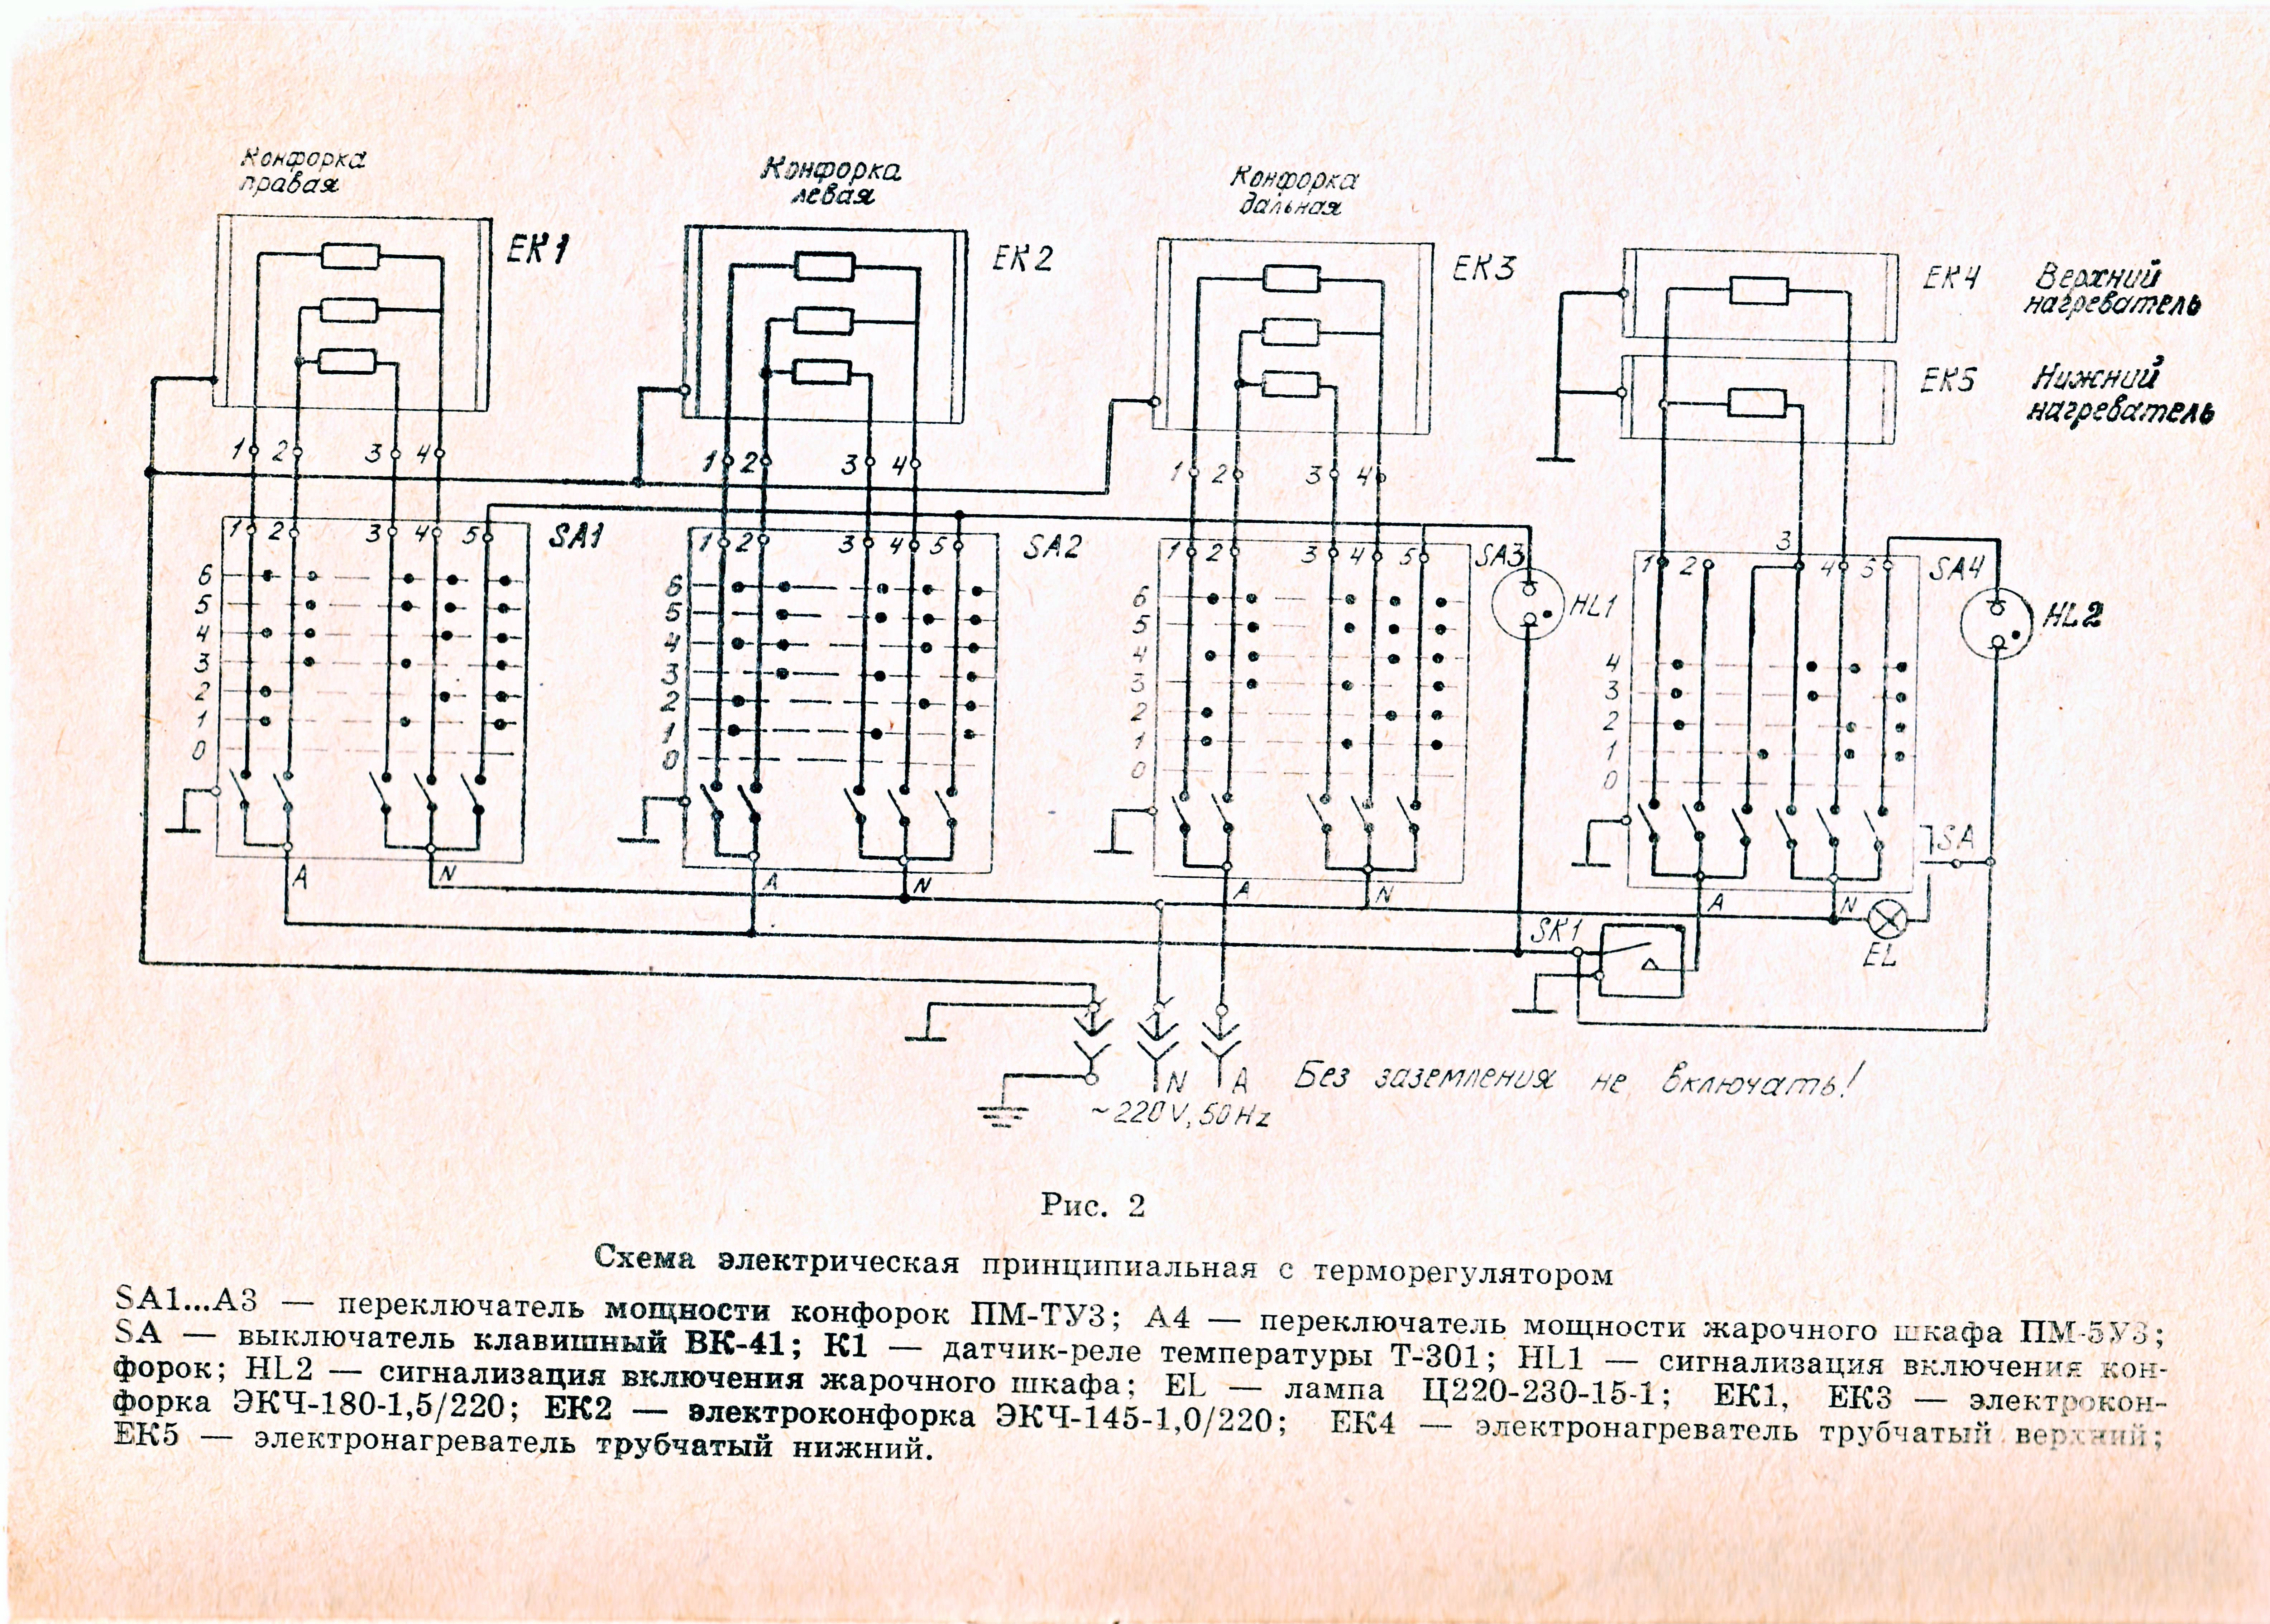 File:wiring Diagram Of Ussr Electric Stove - Wikimedia Commons - Electric Stove Wiring Diagram